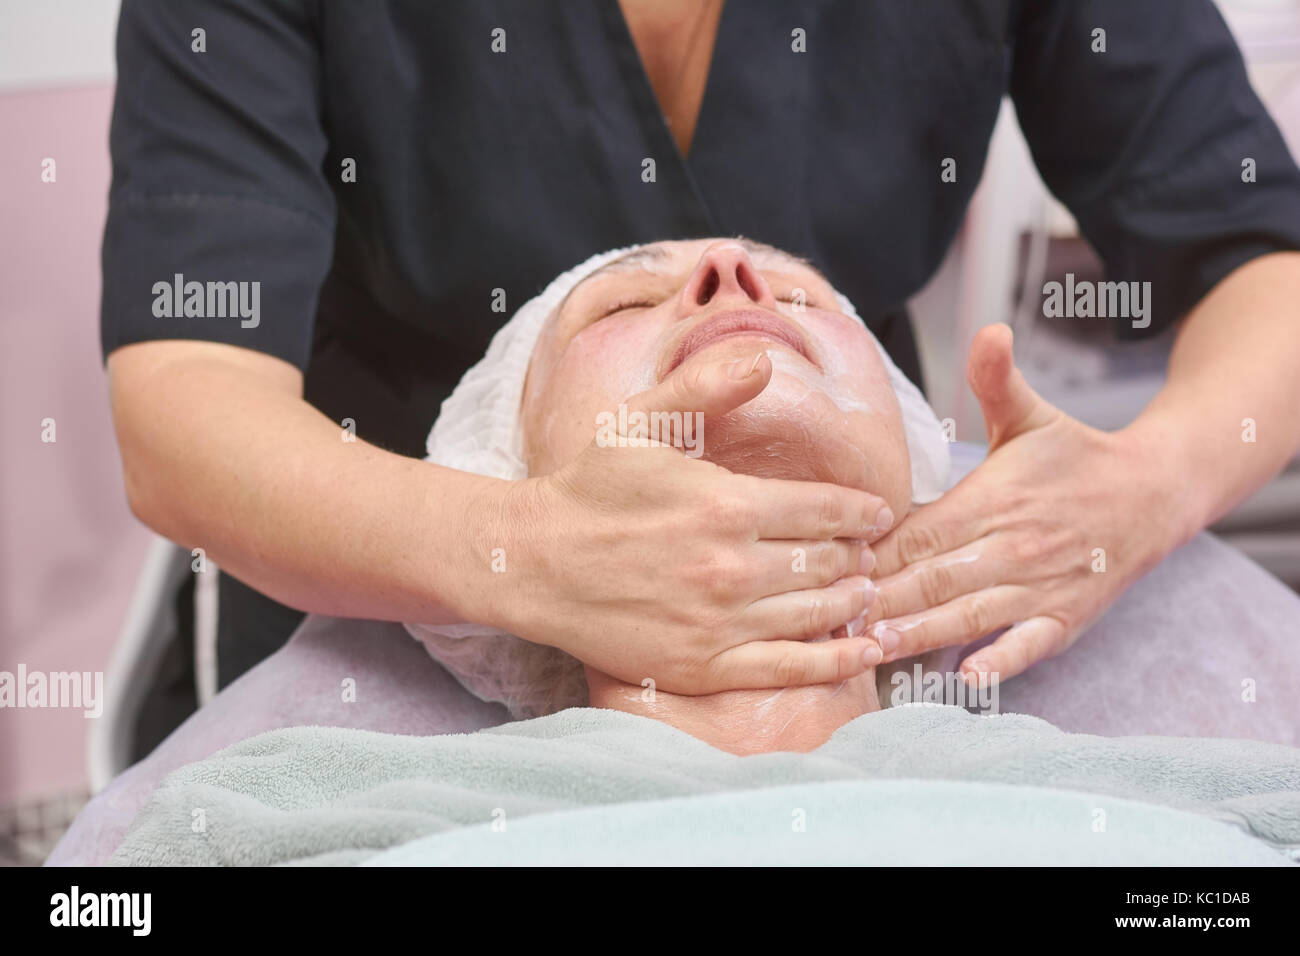 Lymphatic face massage, adult woman. Stock Photo